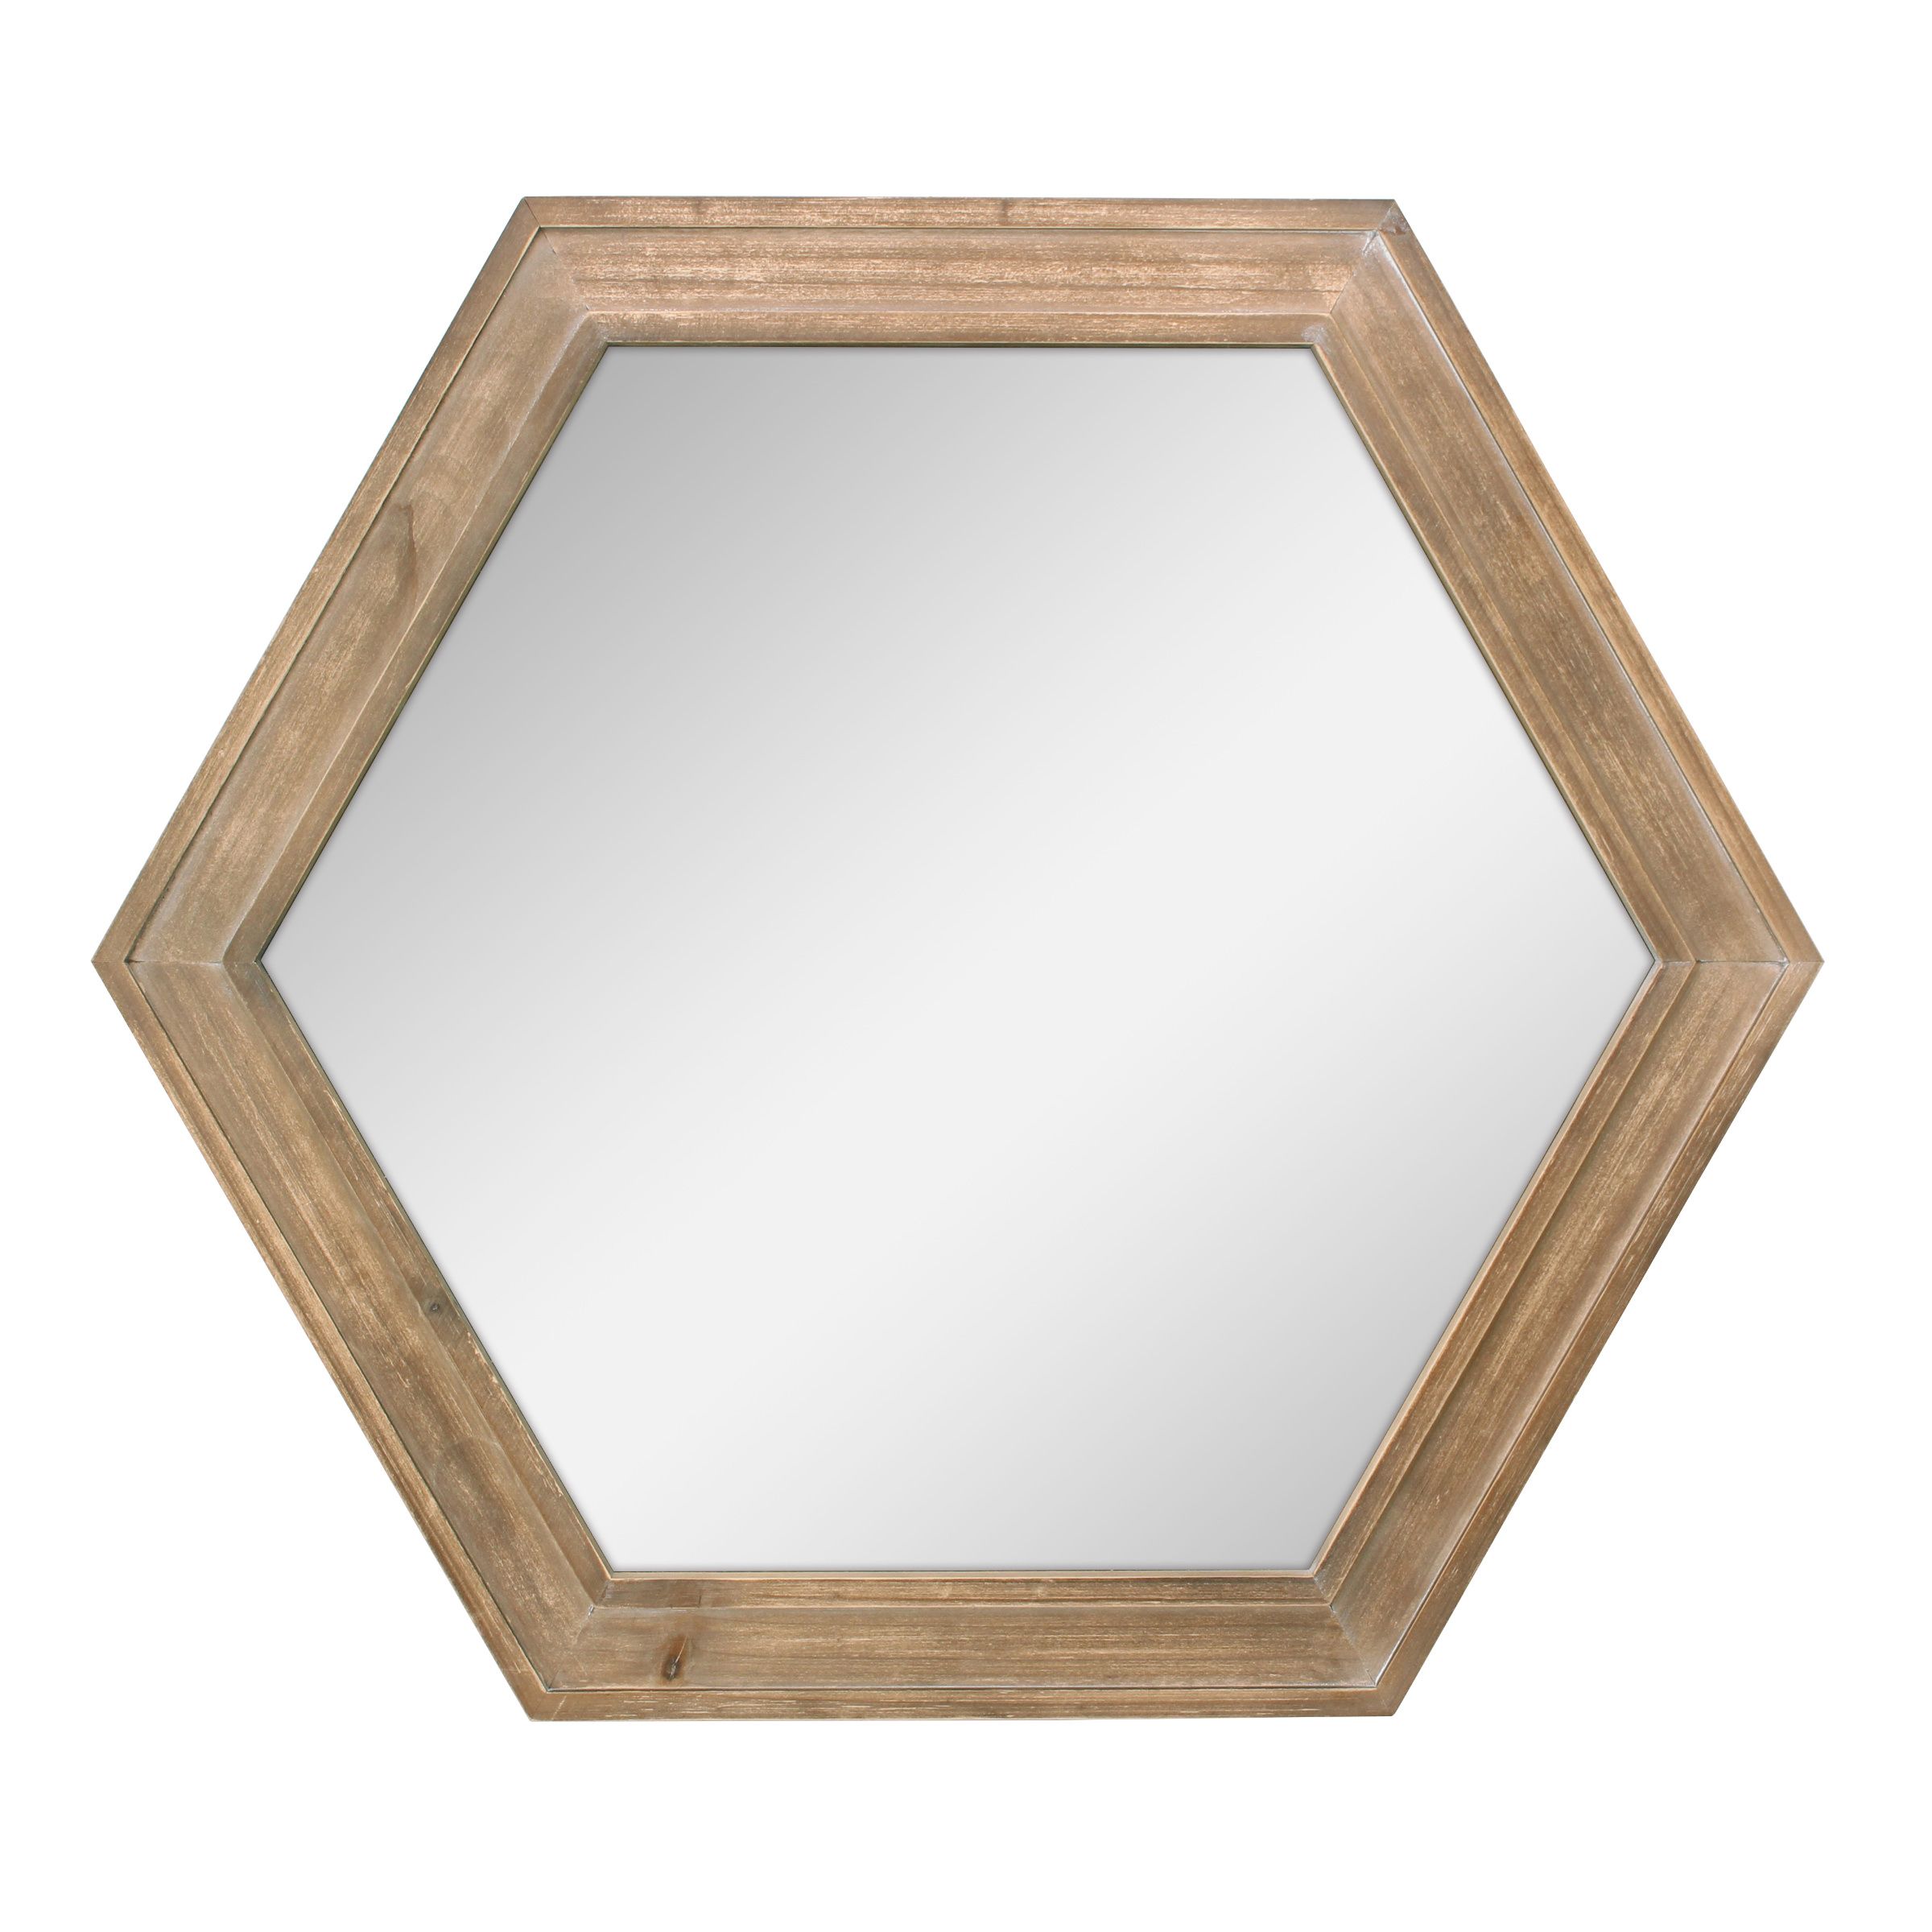 Stonebriar Decorative 24" Hexagon Hanging Wall Mirror With With Recent Hexagons Wood Wall Art (View 4 of 20)